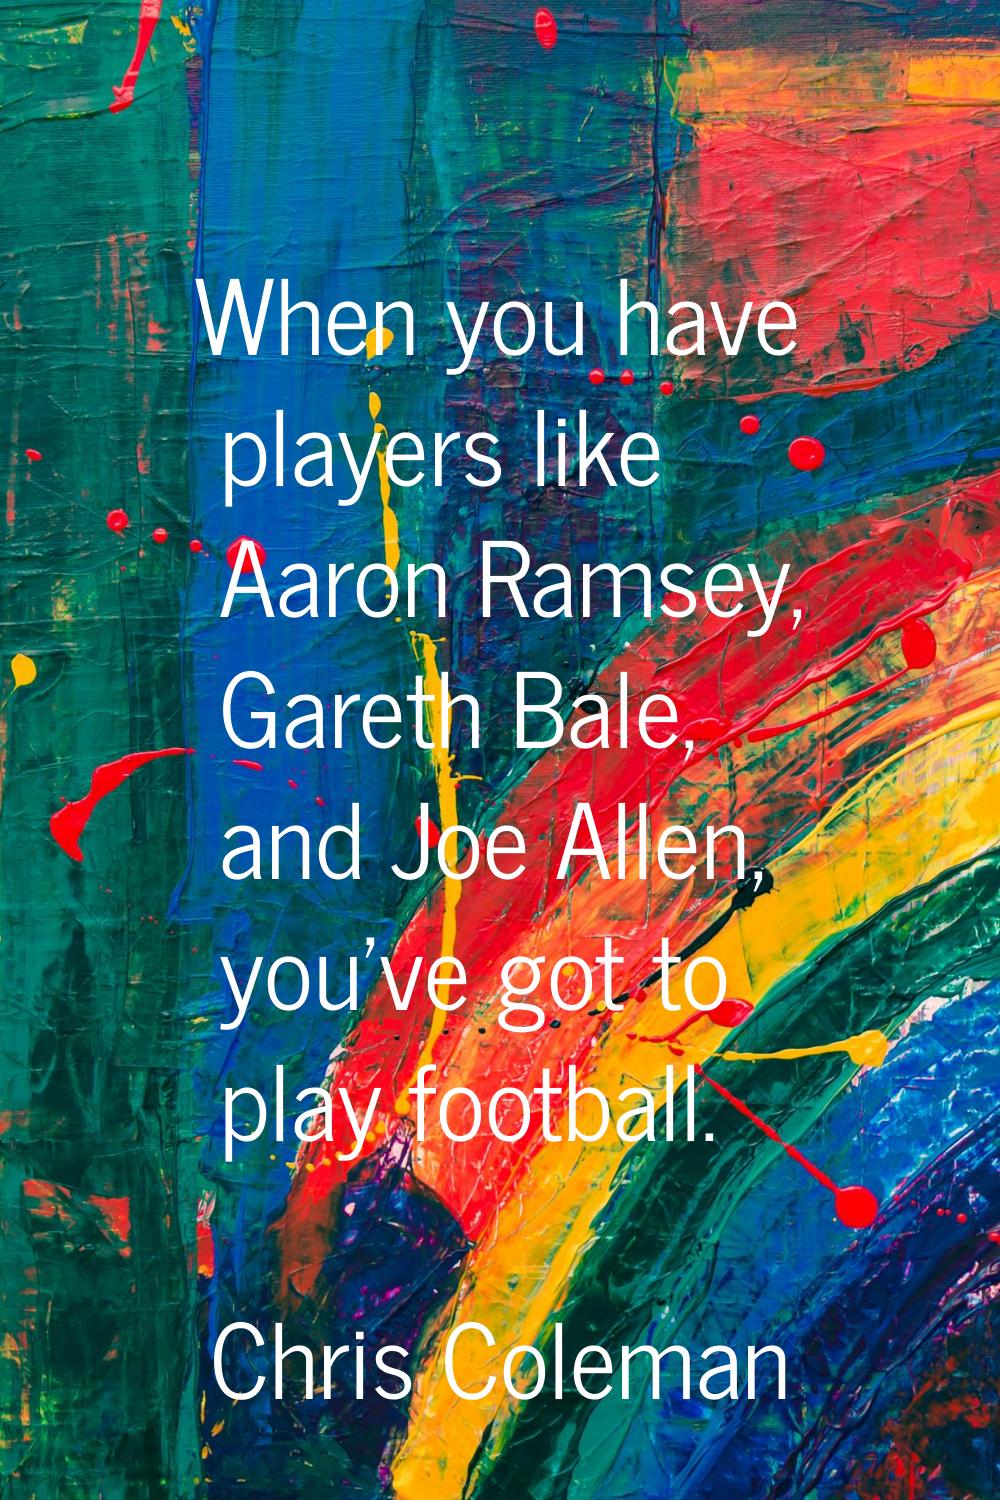 When you have players like Aaron Ramsey, Gareth Bale, and Joe Allen, you've got to play football.